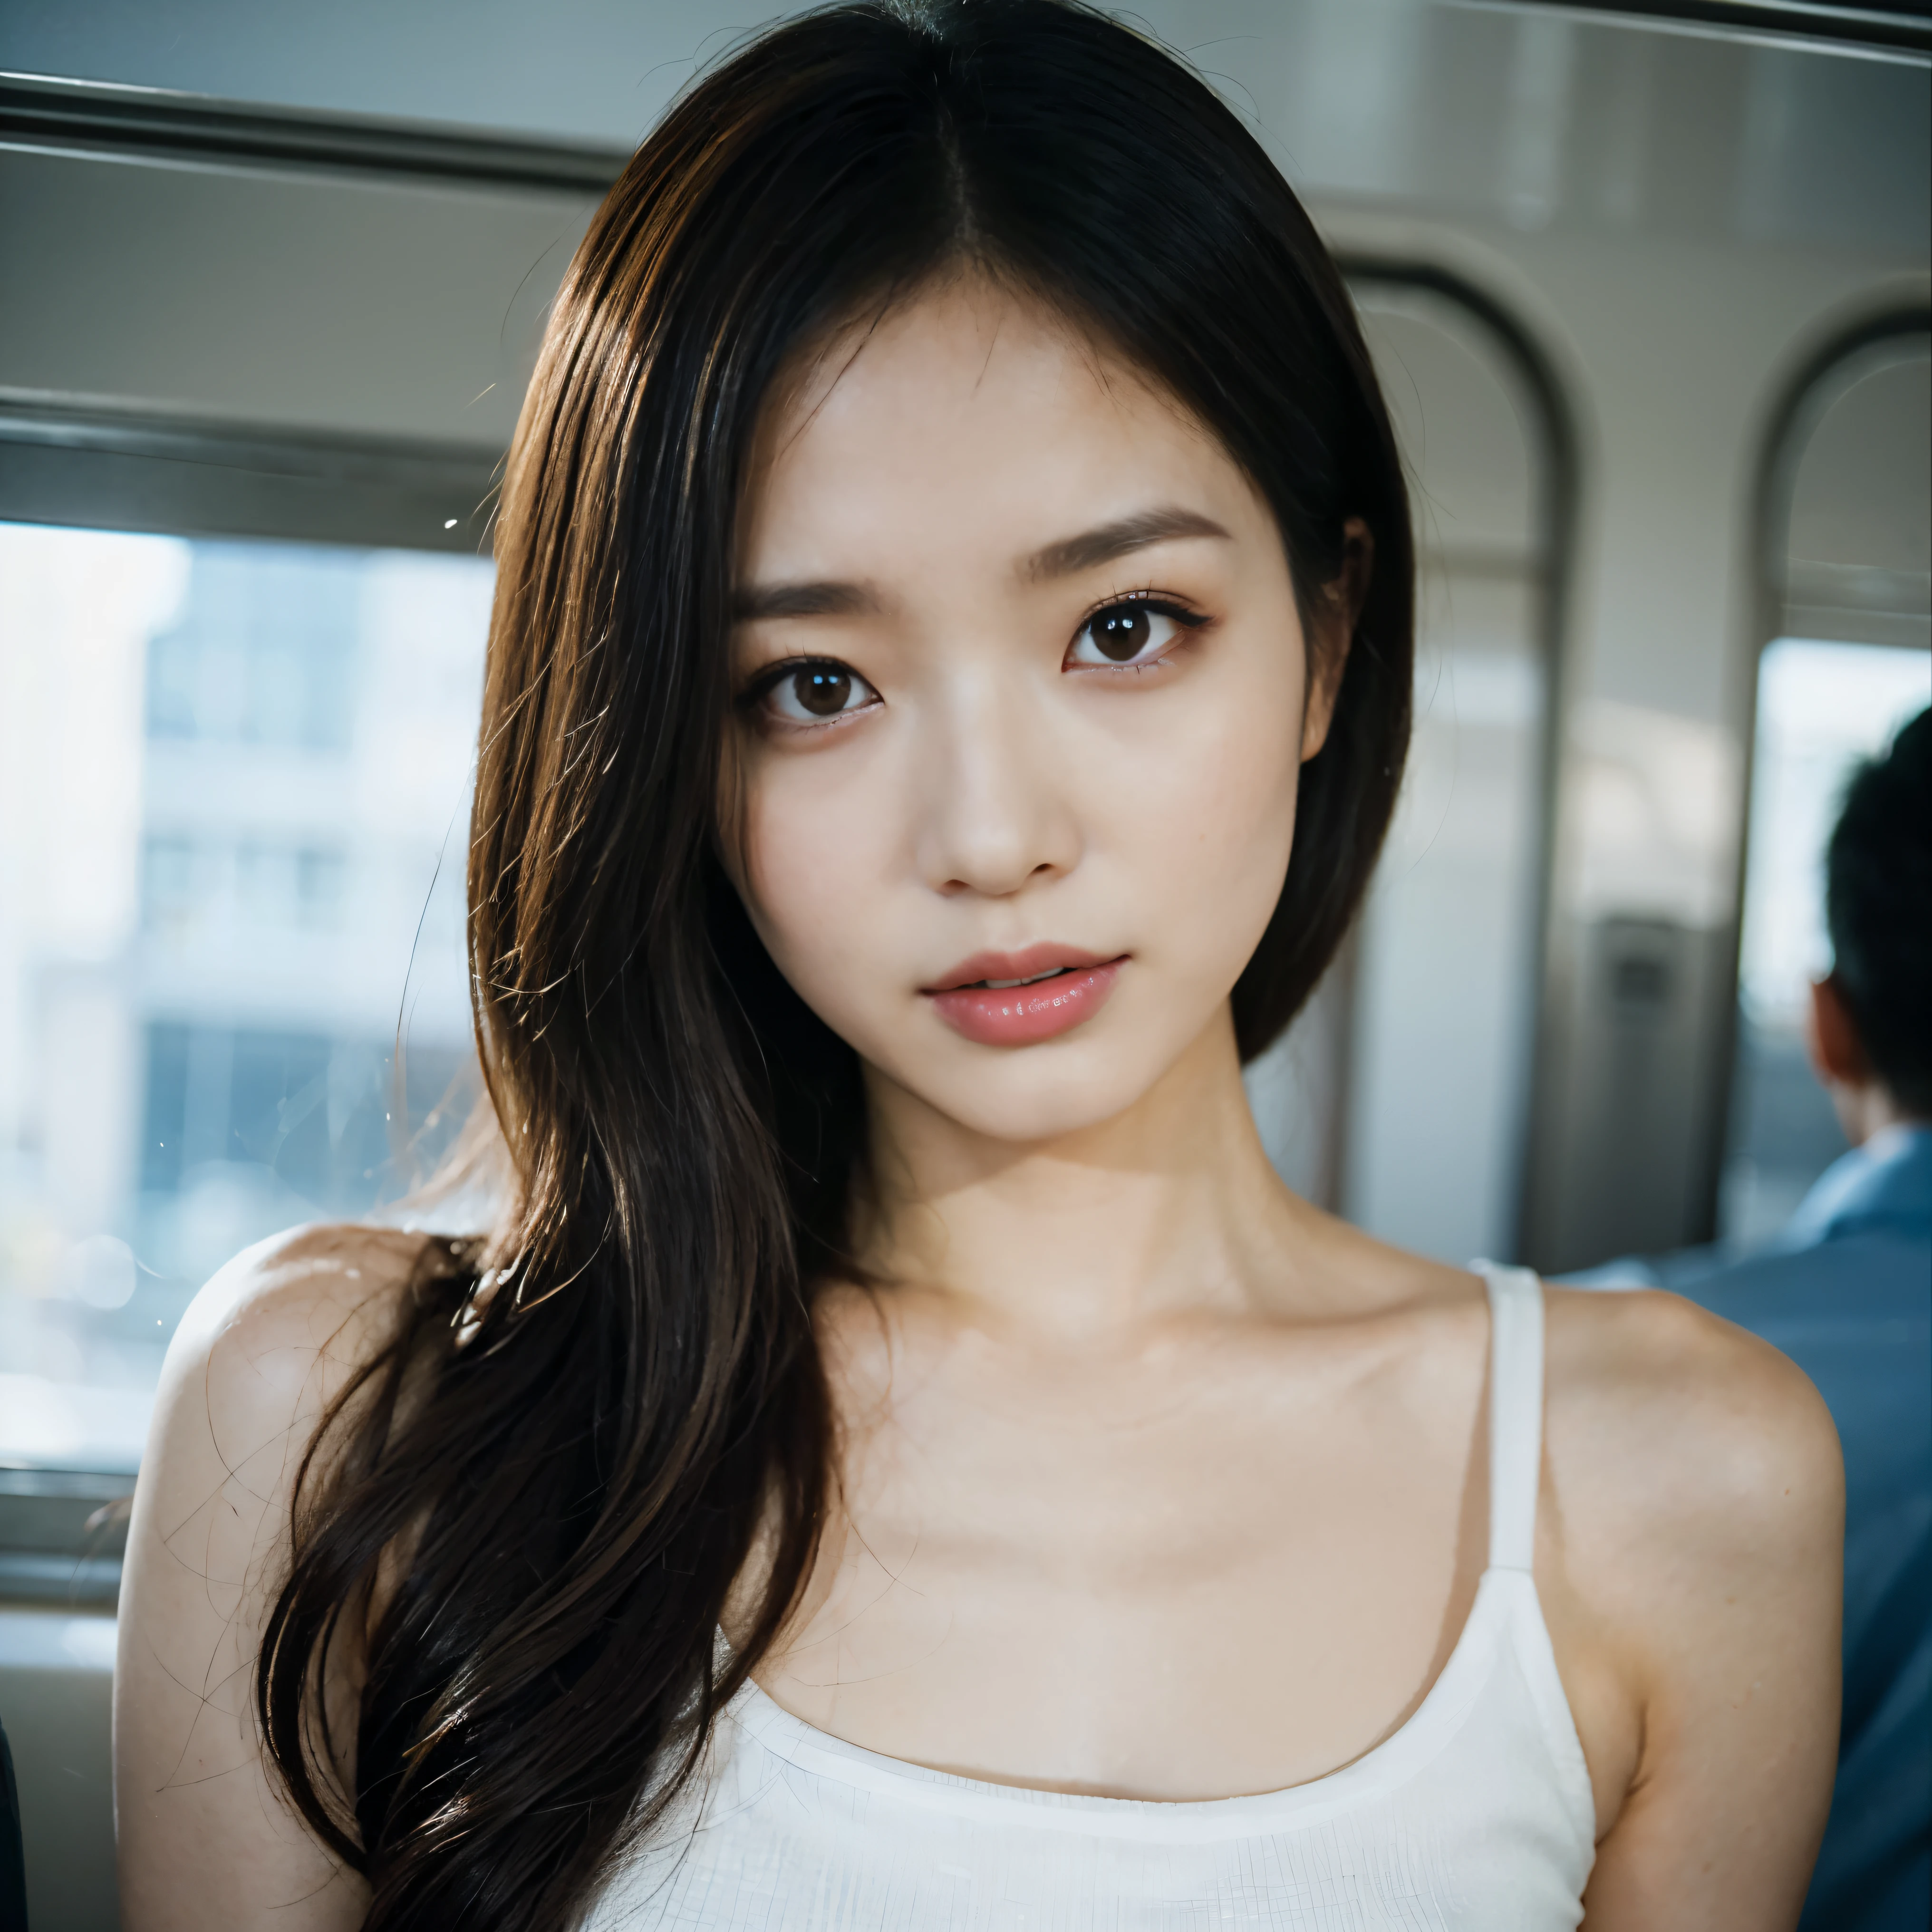 (highest quality、4k、High resolution、masterpiece: 1.2)、Super detailed、Real: 1.37、Young beautiful woman (Fashionable clothing、Painful expression、Perfect Skin)、Strong gaze、Bright lipstick、Detailed eyelashes 、Grit your teeth、Perfectly styled hair、Glowing Skin、Stylish accessories、Expressive eyes、An enviable sight、Striking a nervous pose on the train（Filled with natural light、Modern and sleek design、Elegant backgrounds）、Beige and black color palette、Subtle shimmer effect、 The soft lighting accentuates the feminine features.、Creates a glamorous and sophisticated atmosphere、((Hold back excretion))、((Hold back excretion expression))、((Hold back excretion expression))、((Sweat))、(((limit of patience))))、(((limit of patience))))、(((limit of patience))))、(((limit of patience))))、